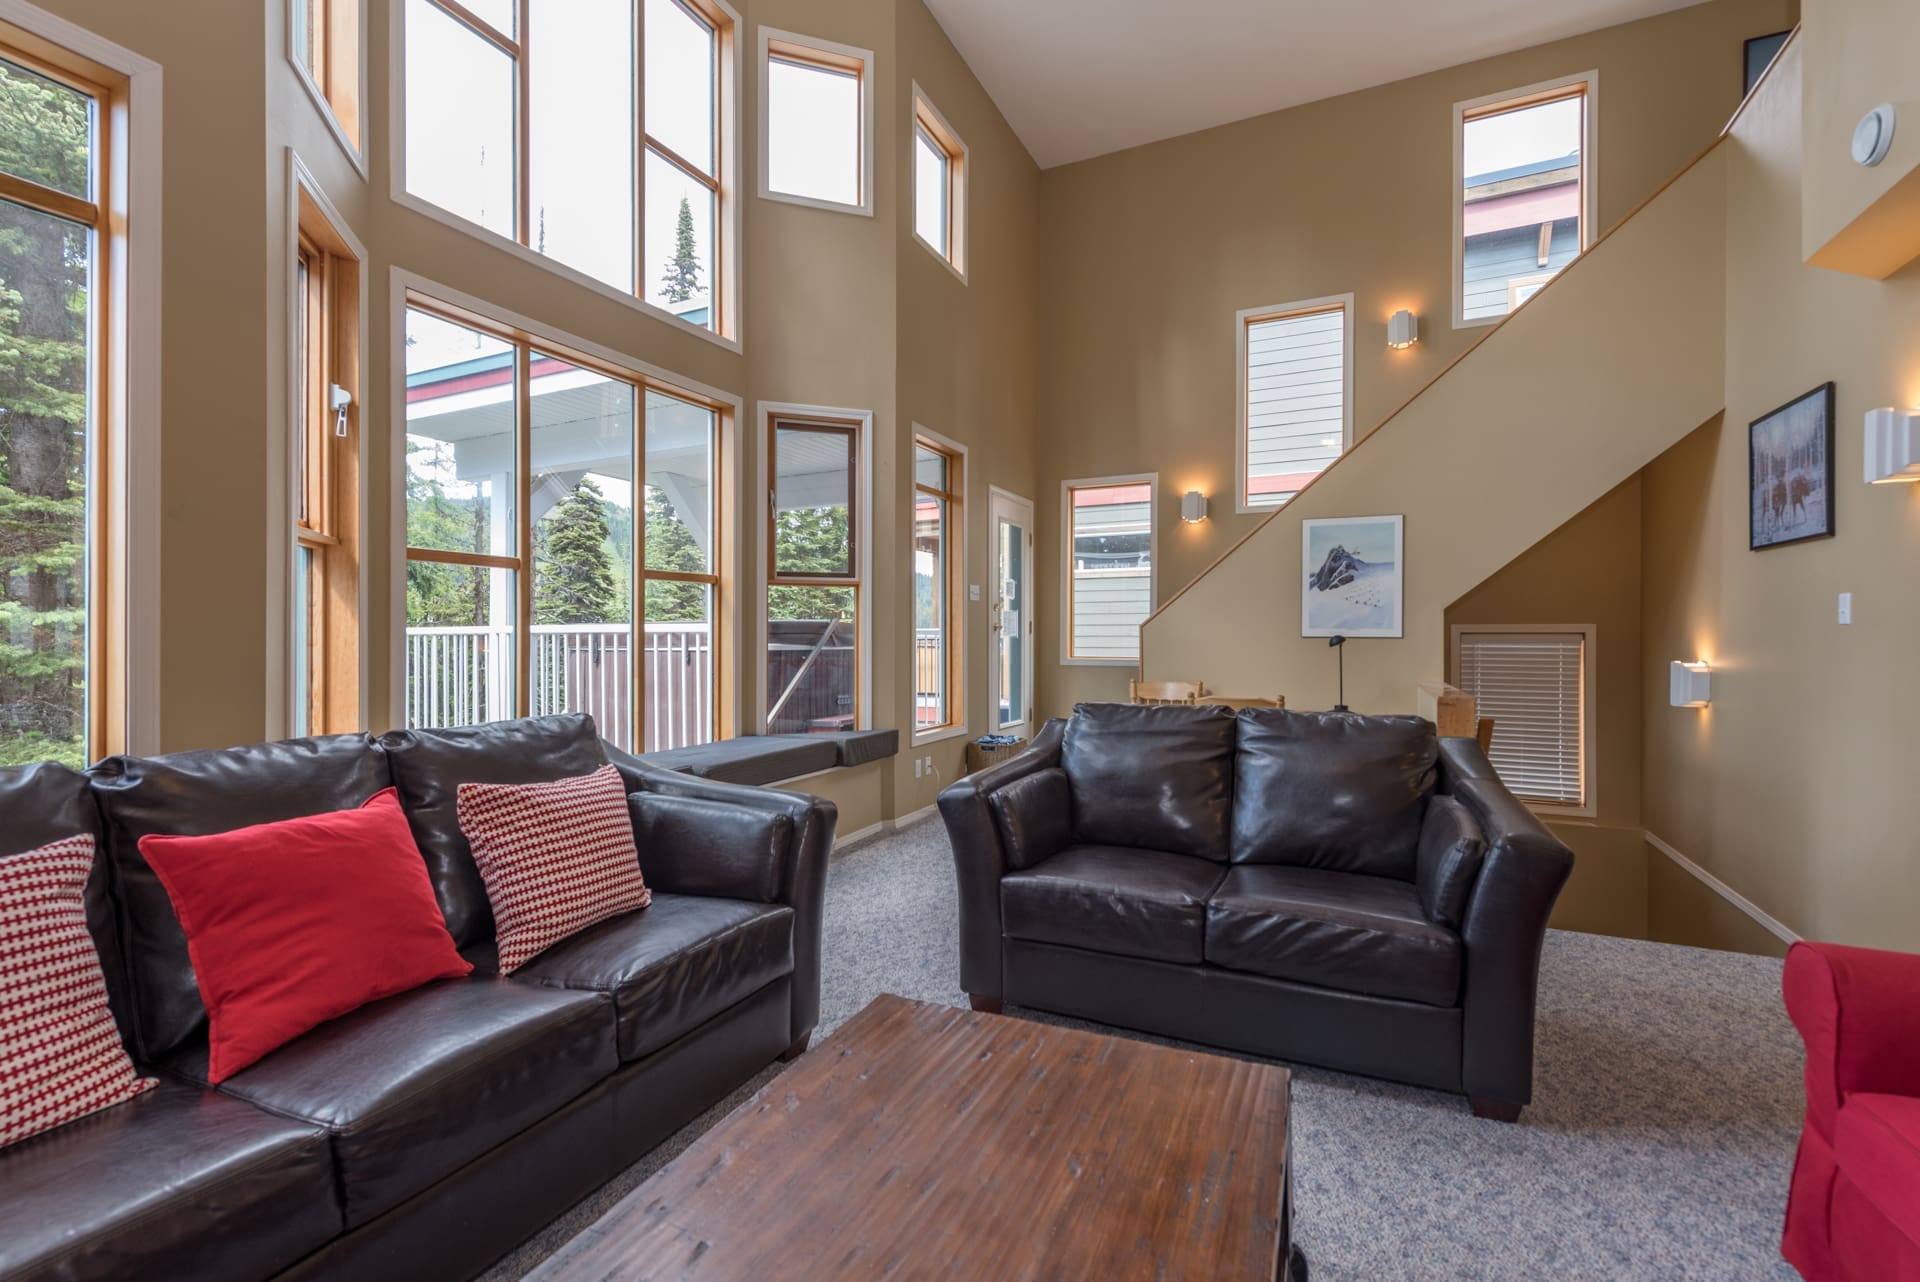 High vaulted ceilings with huge windows and incredible views of the mountains. Leather couches in living room, open concept living space for families and friends to spread out. Main level has living, dining room and kitchen seen in photo.